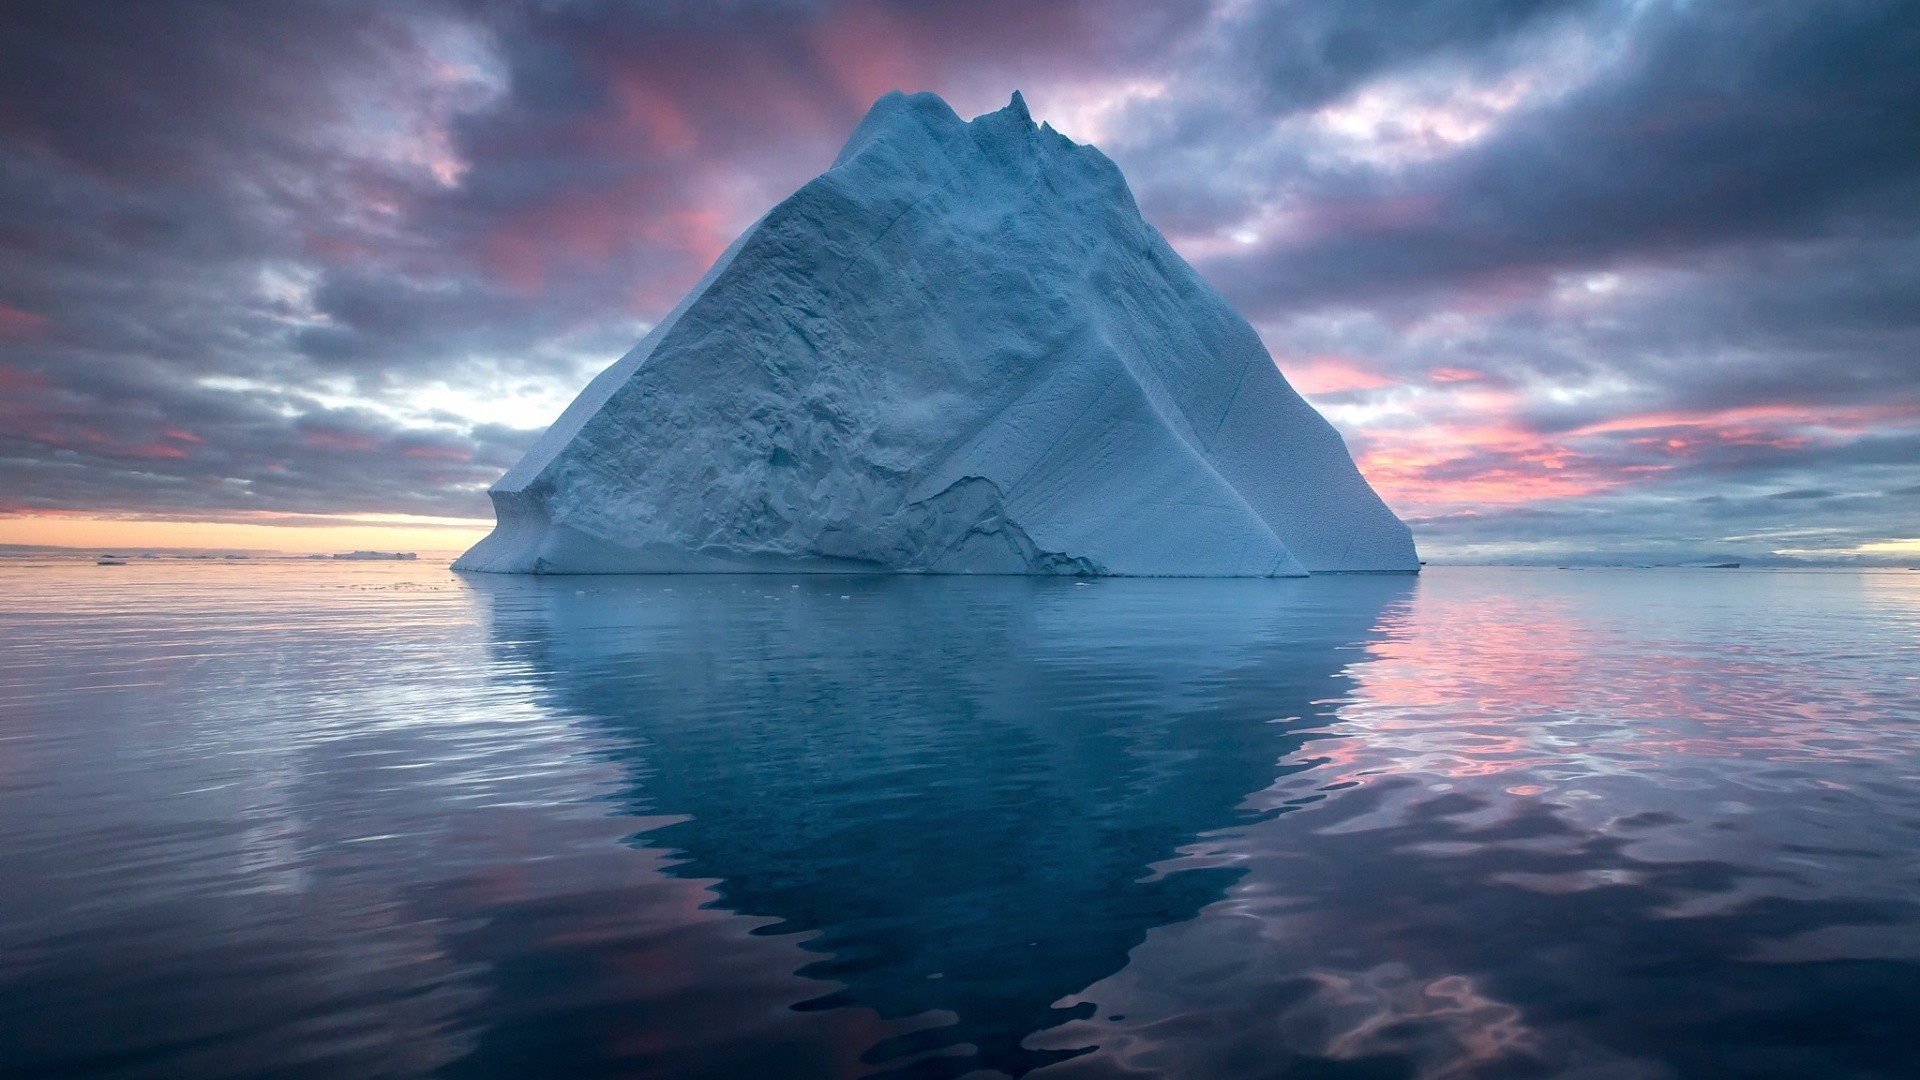 General 1920x1080 nature landscape winter iceberg sea clouds Arctic sunset reflection snow calm triangle